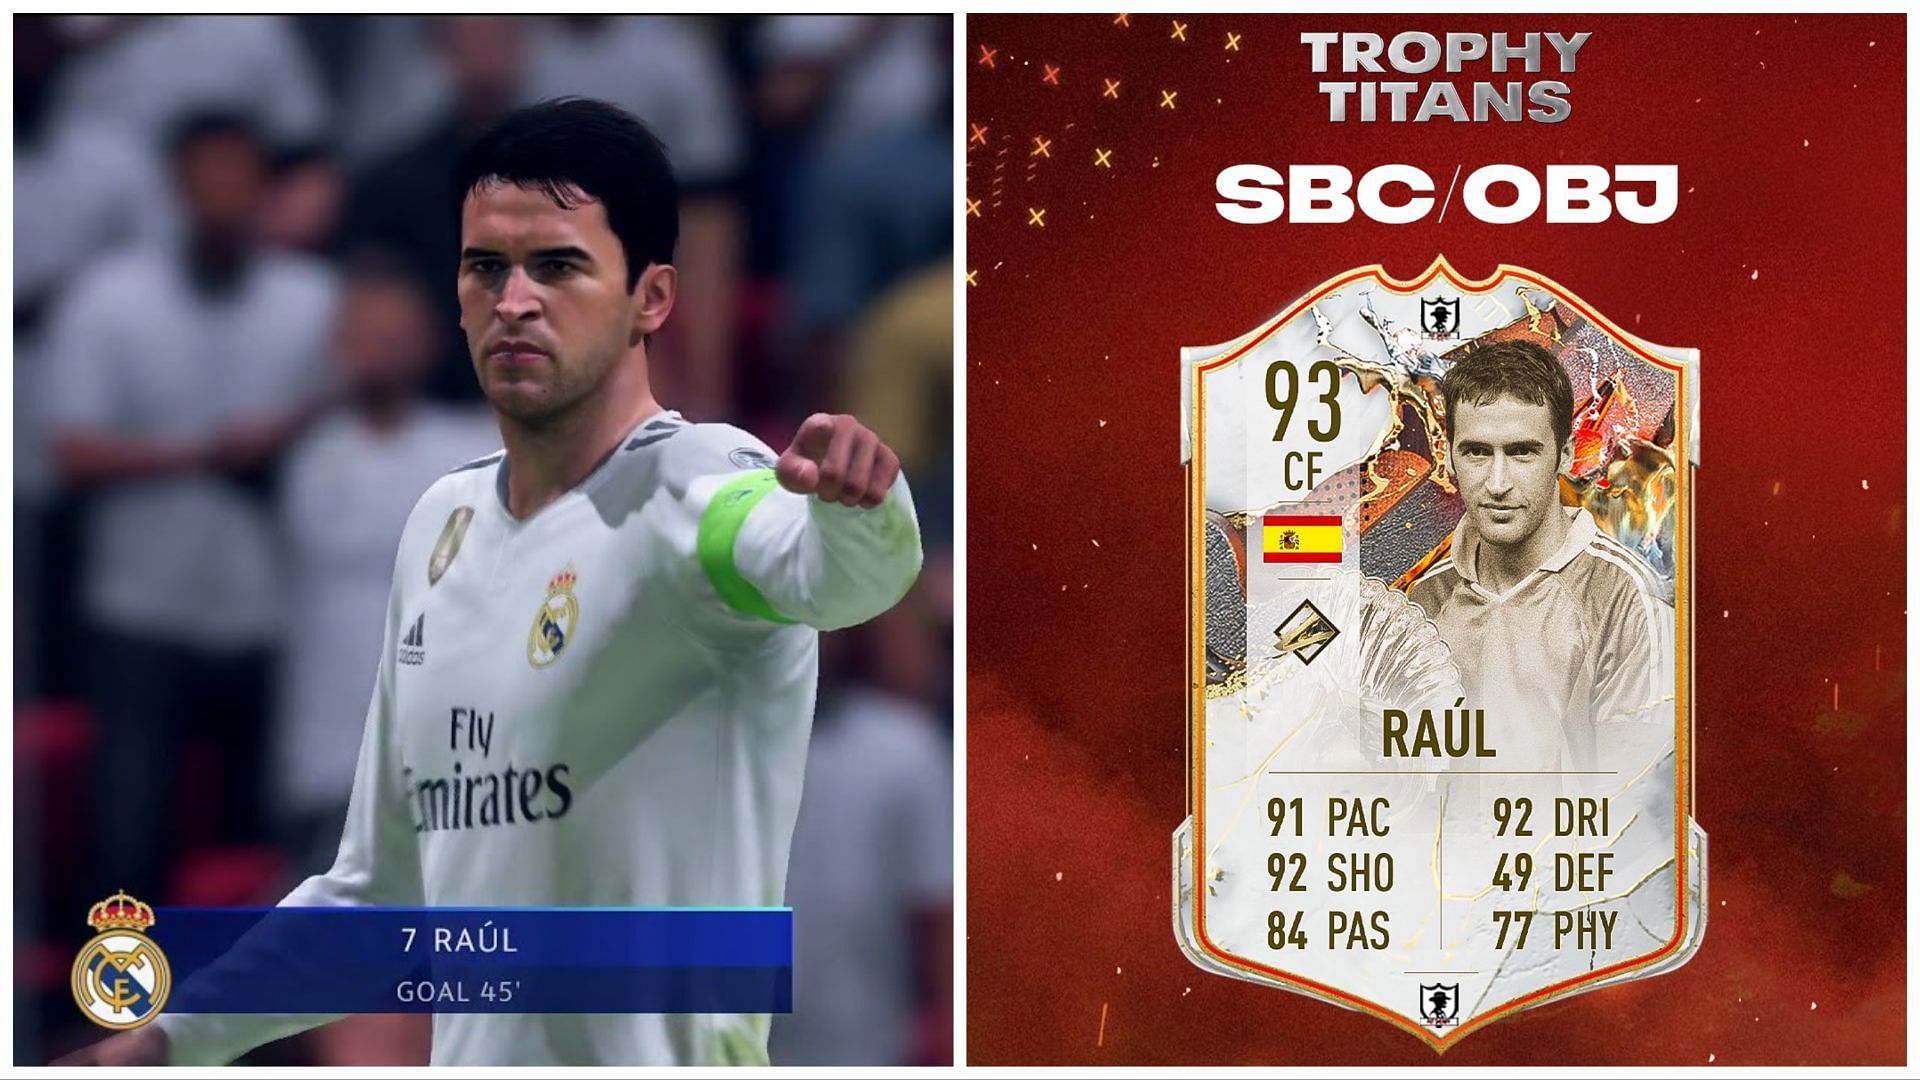 Trophy Titans Raul has been leaked (Images via EA Sports and Twitter/FUT Sheriff)